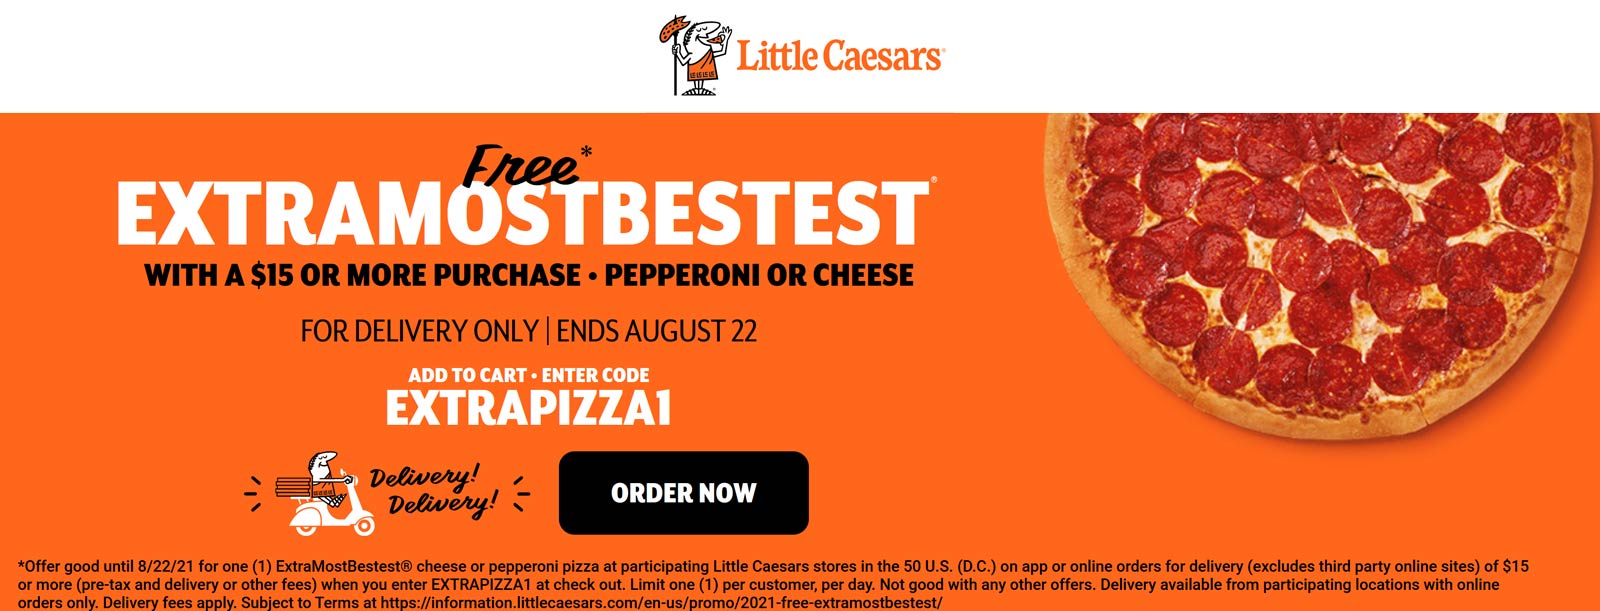 Free ExtraMostBestest cheese or pepperoni pizza with 15 delivery at